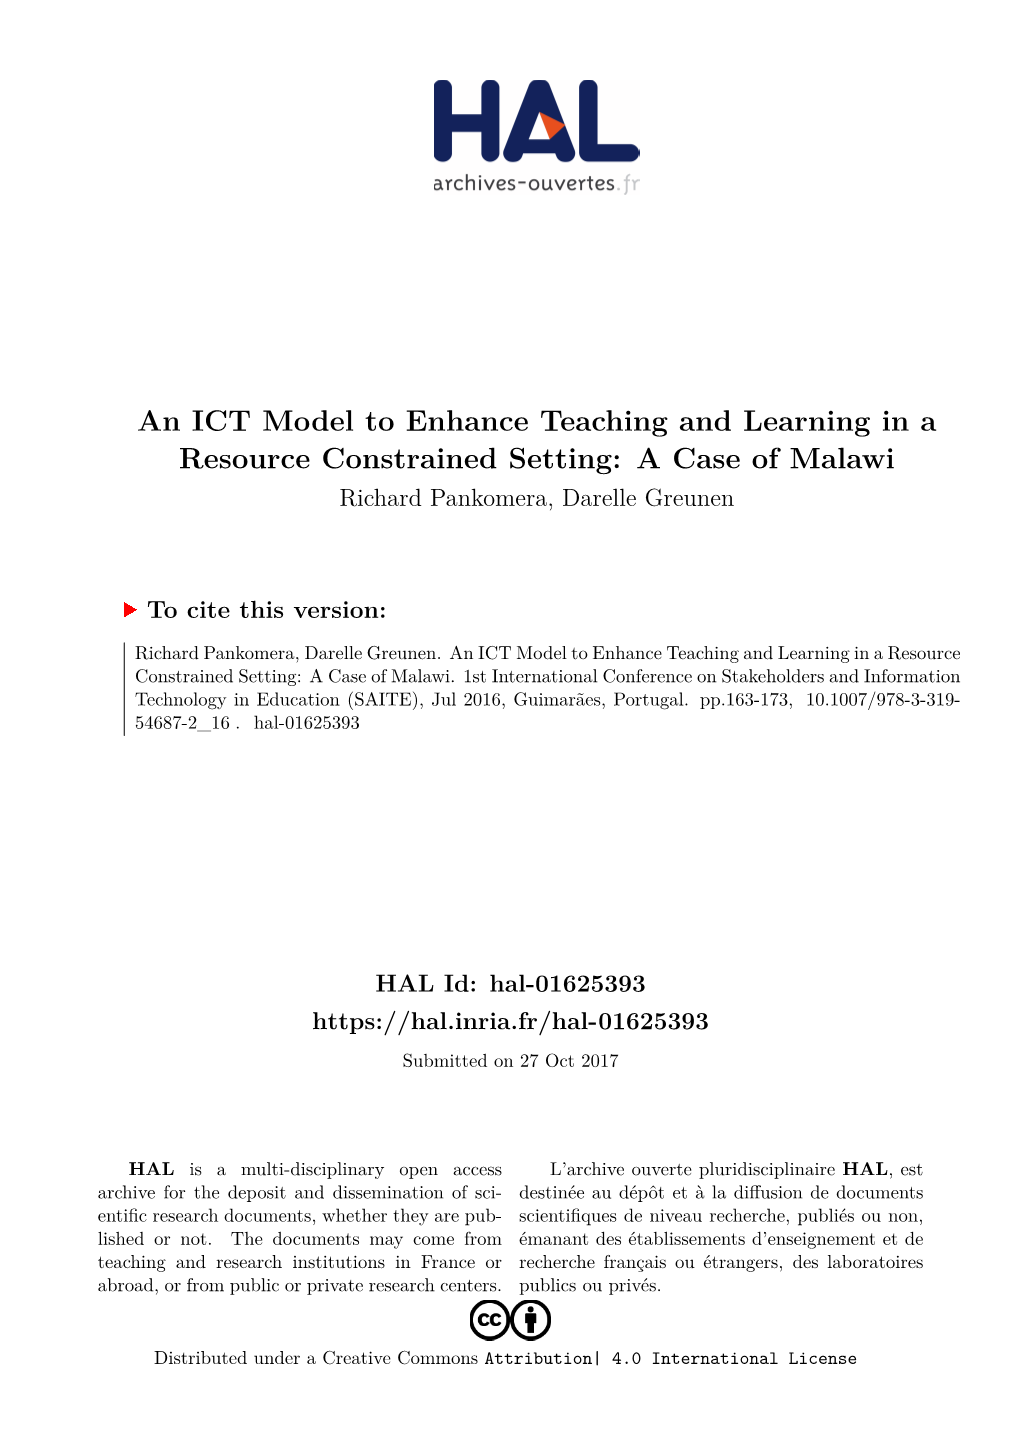 An ICT Model to Enhance Teaching and Learning in a Resource Constrained Setting: a Case of Malawi Richard Pankomera, Darelle Greunen